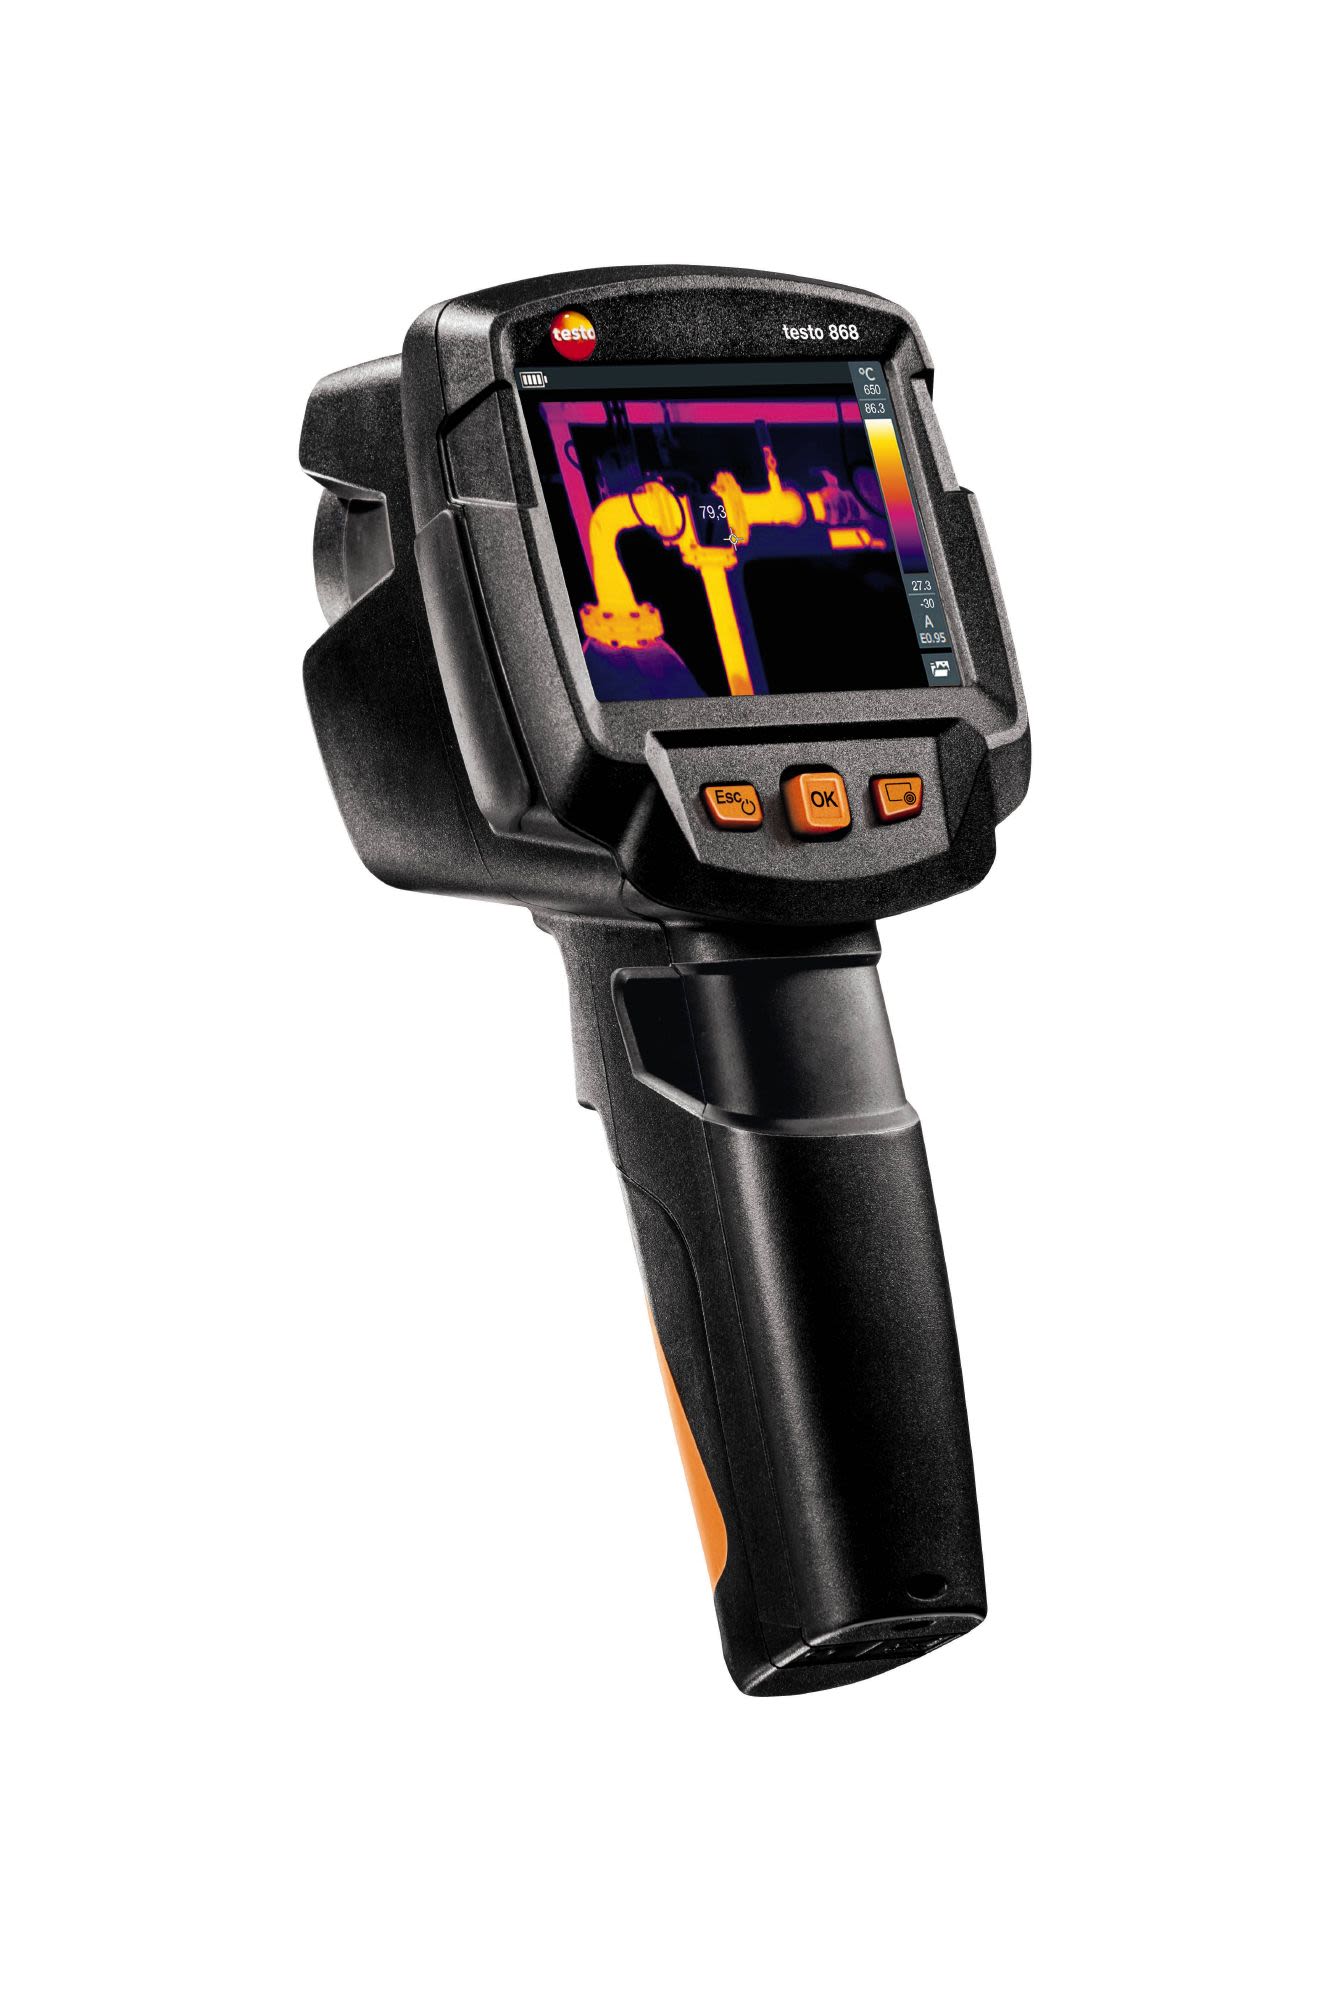 Testo 868 Thermal Imaging Camera, 0 → +650 °C, -30 → +100 °C, 160 x 120pixel Detector Resolution With RS